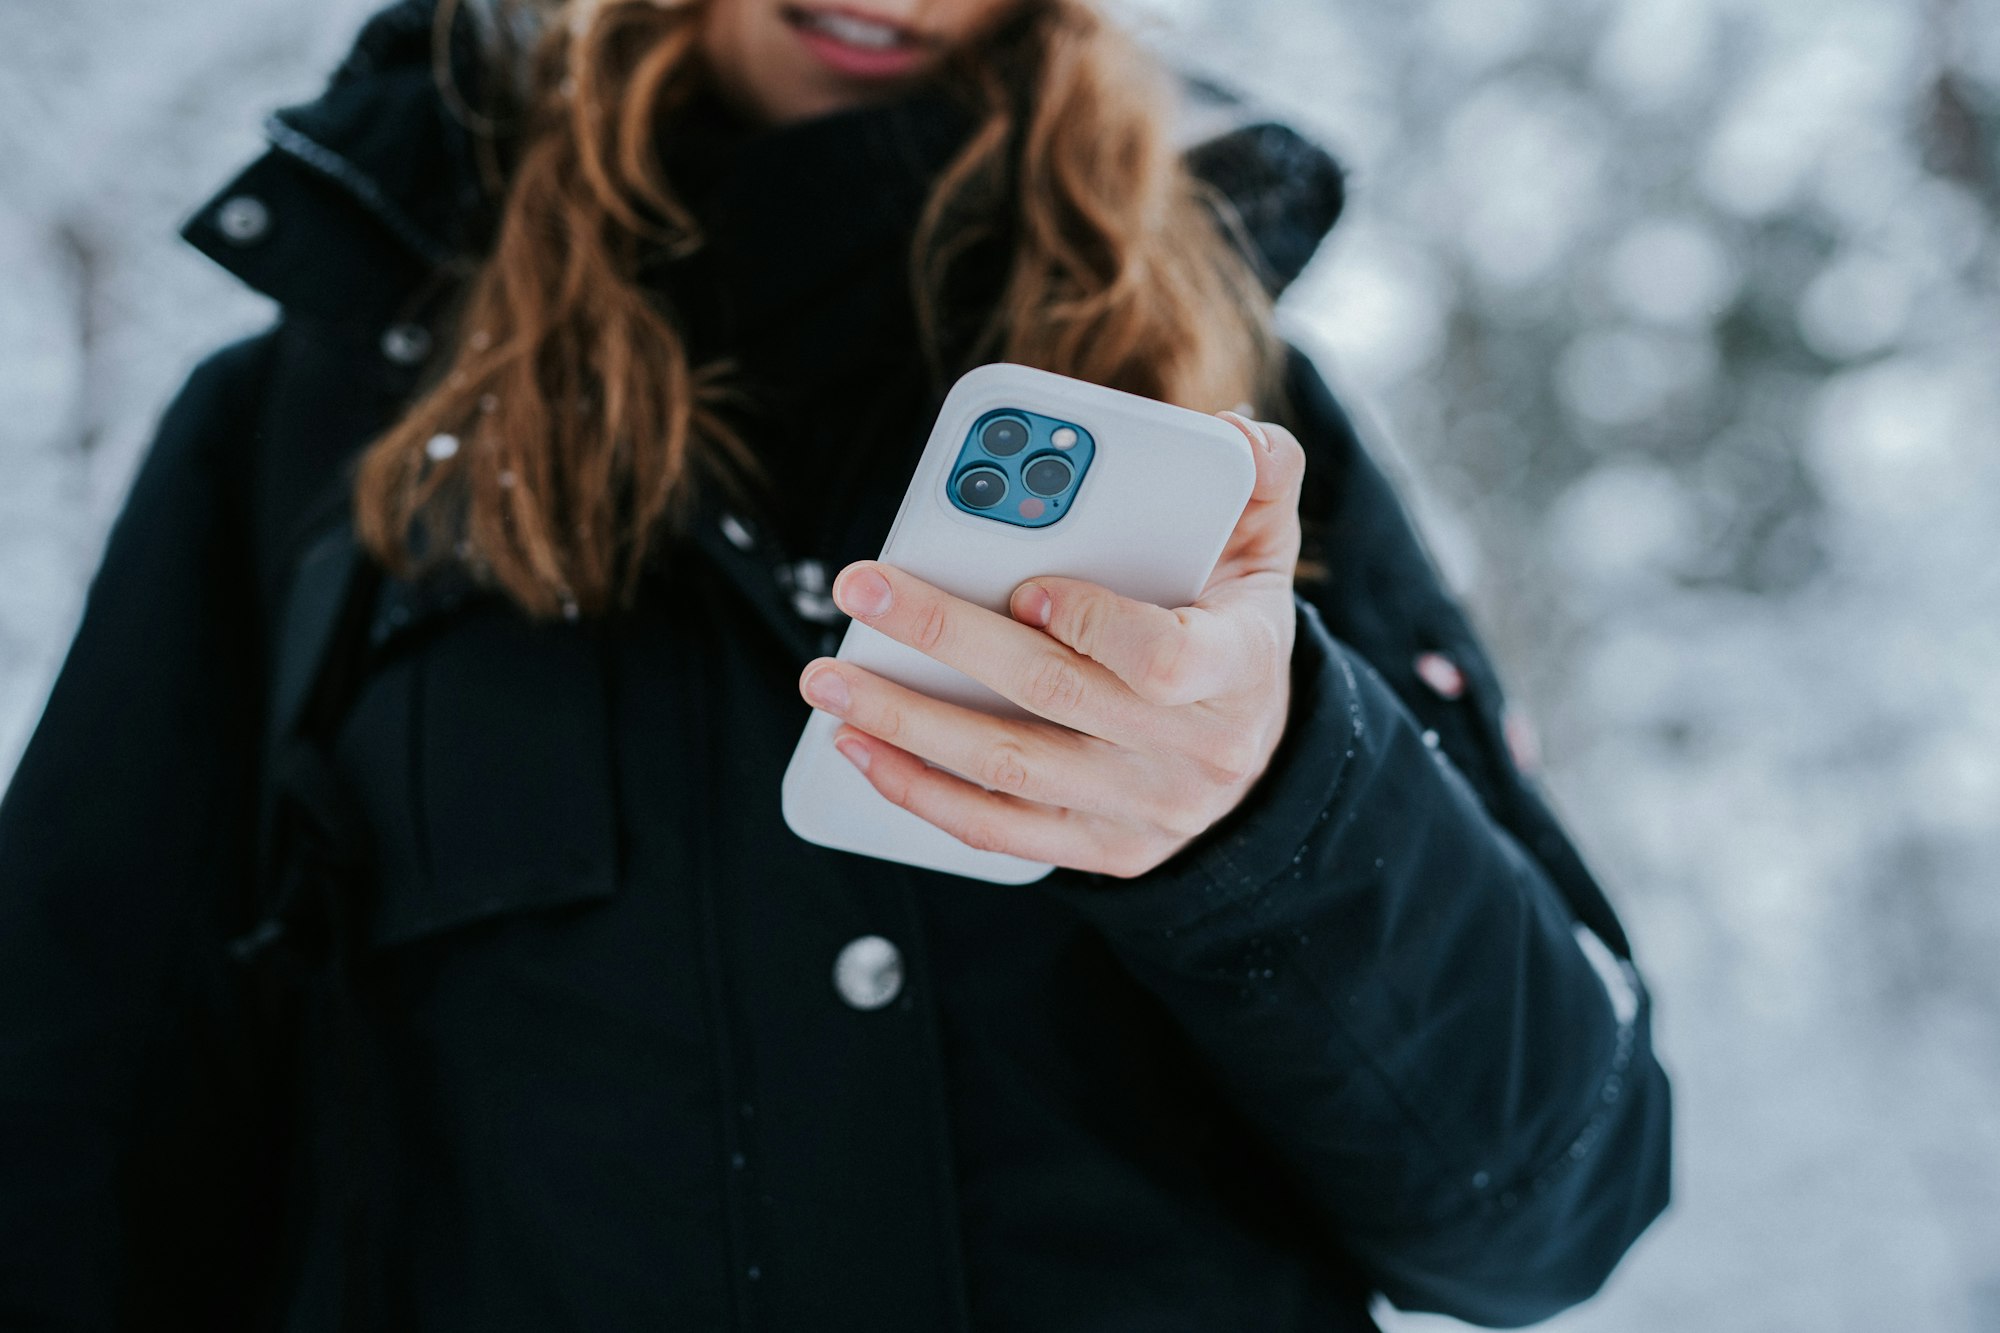 A woman holding an iphone 12 taking pictures and discovering her timeline on her smartphone. Outside in winter checking her phone. If you like link our website https://www.dieberater.de, we find your content via image backward search and even share your content if it's great. 